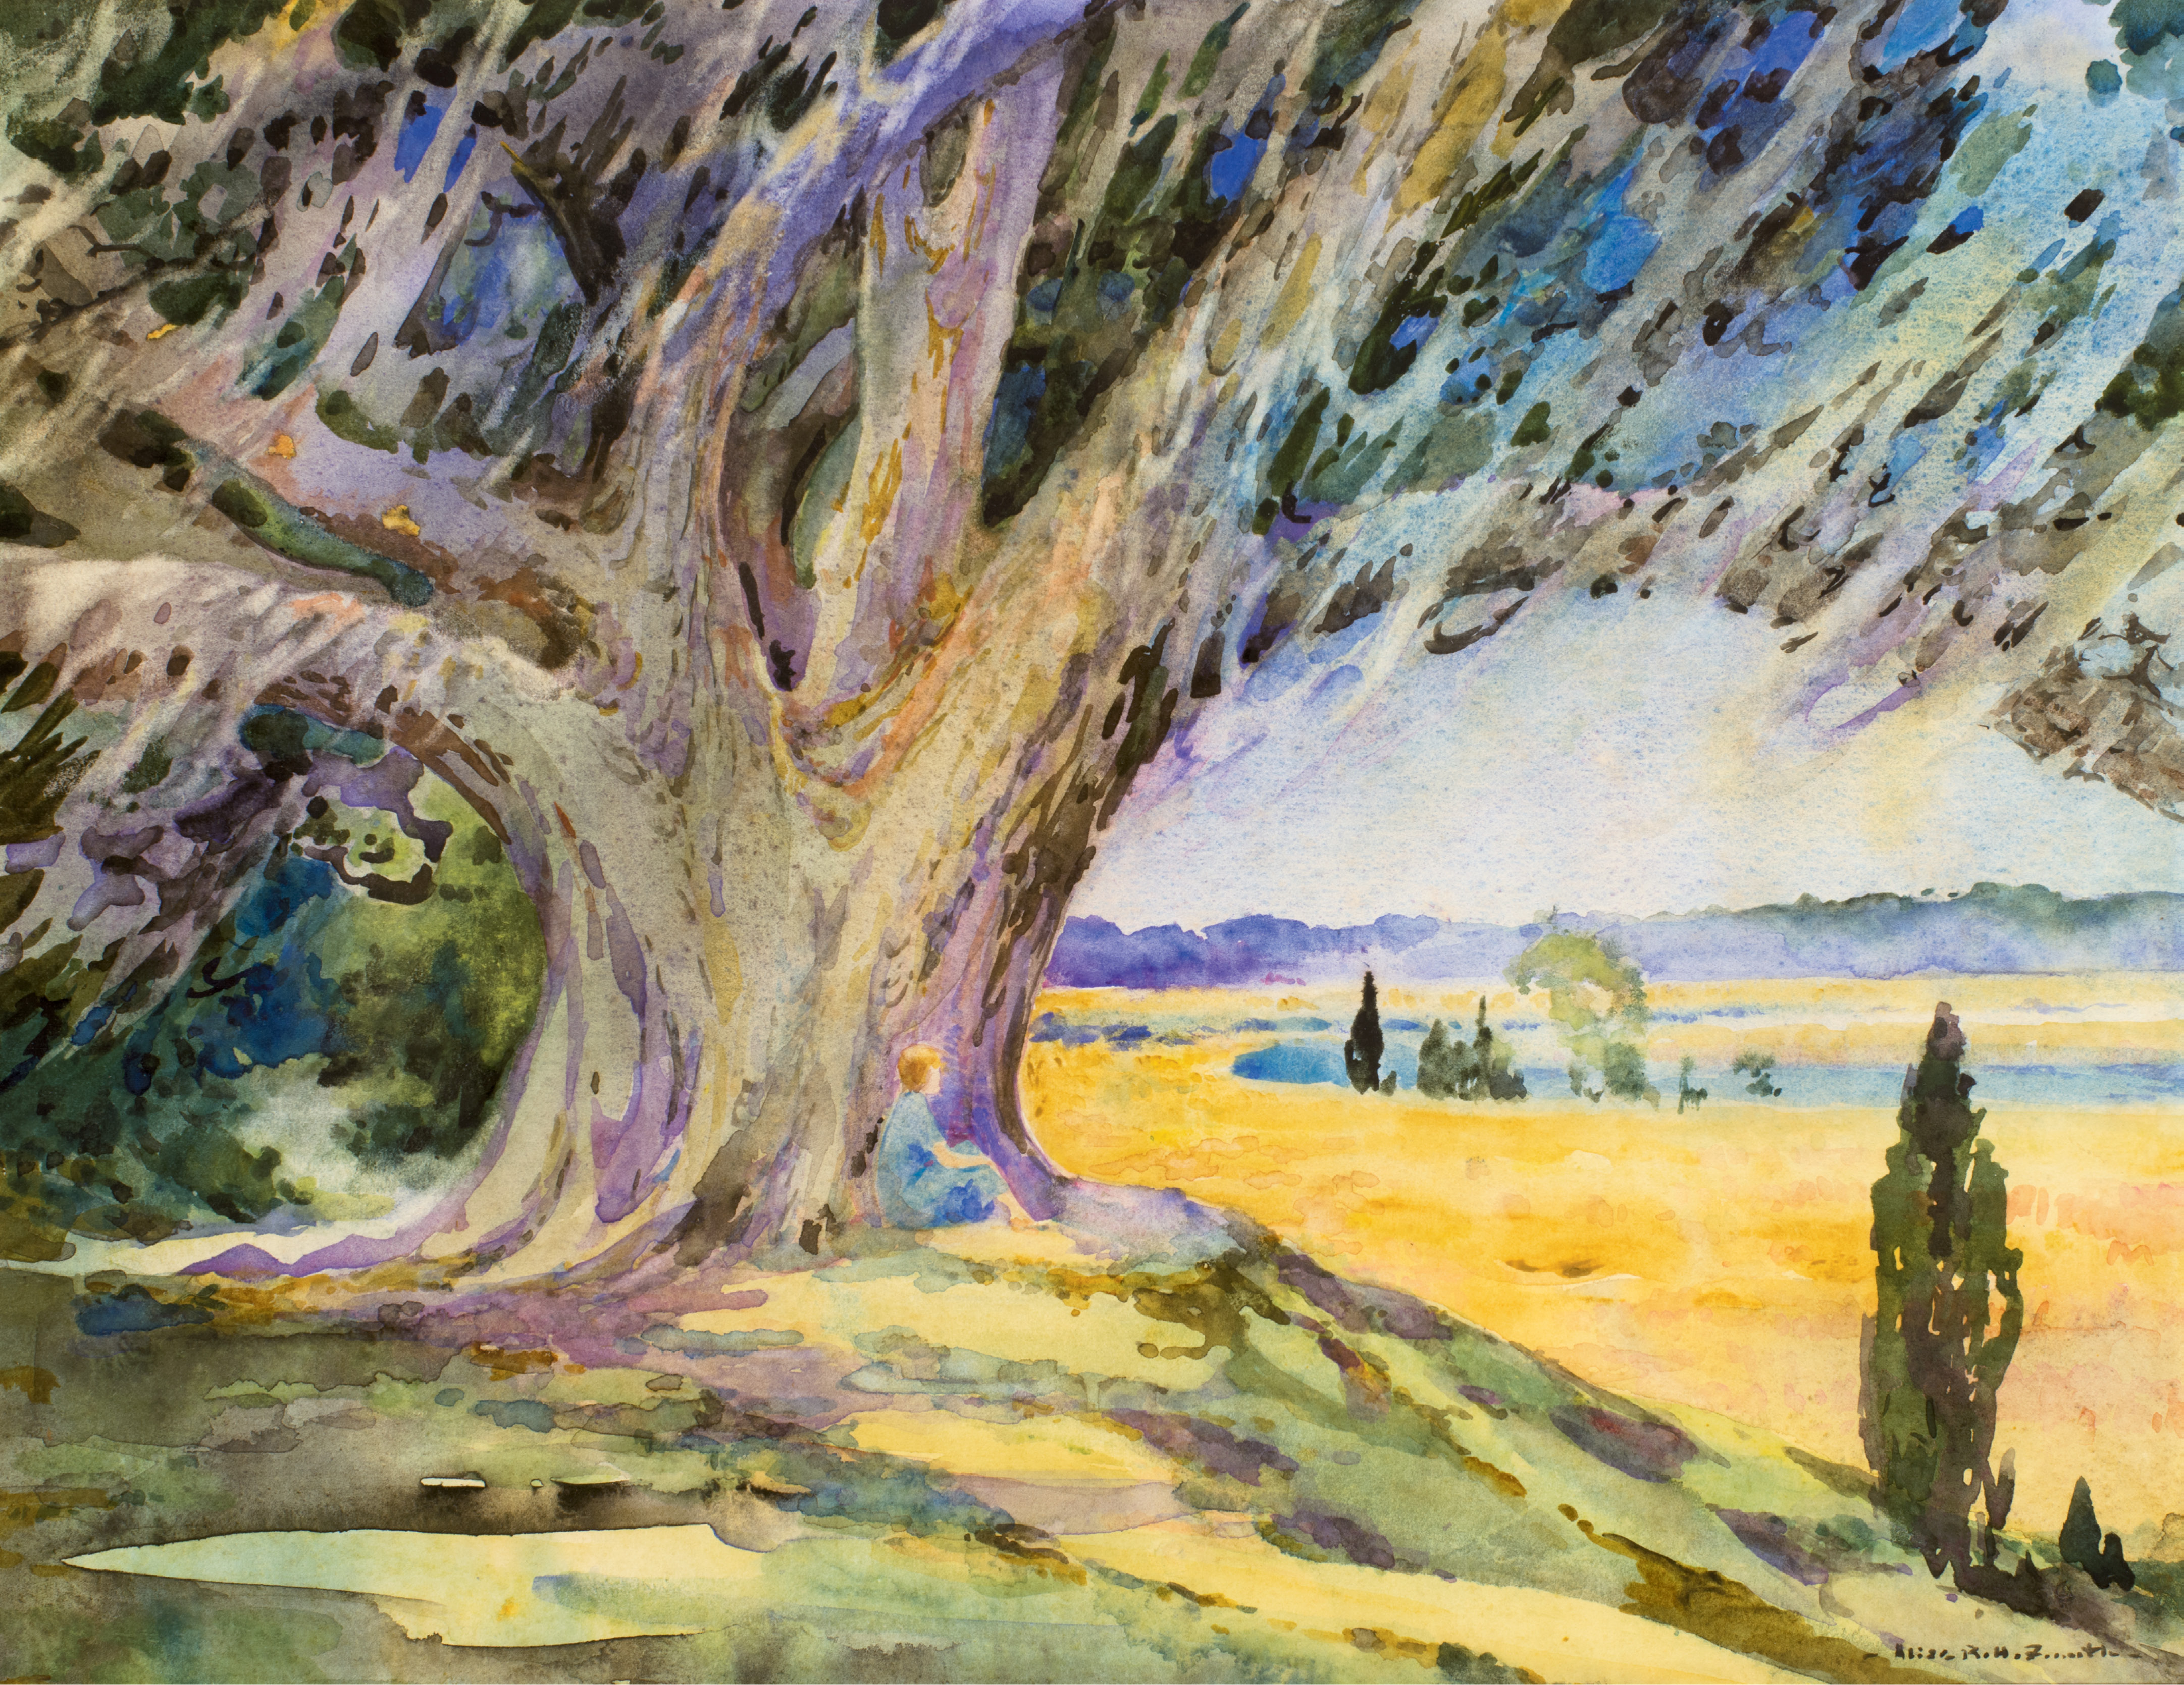 Middleton Oak and Rice Field with Miss Josephine Smith	(watercolor, 1924, courtesy of Charles H. P. Duell)